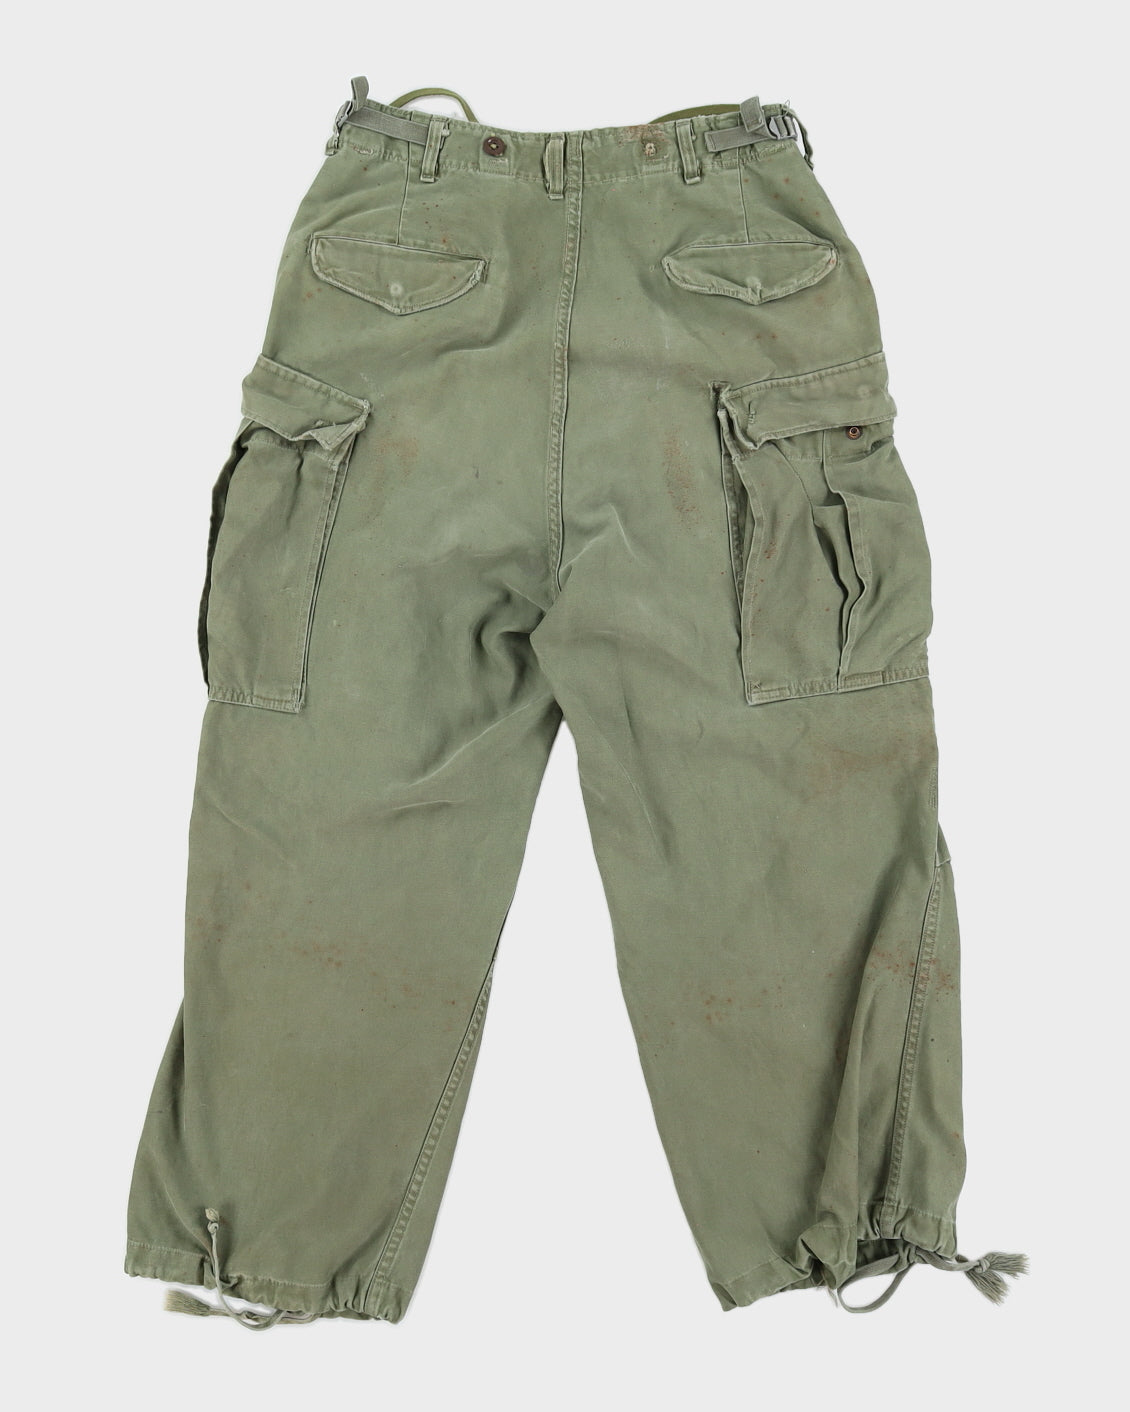 50s US Army M51 Fields Trousers - 30x25